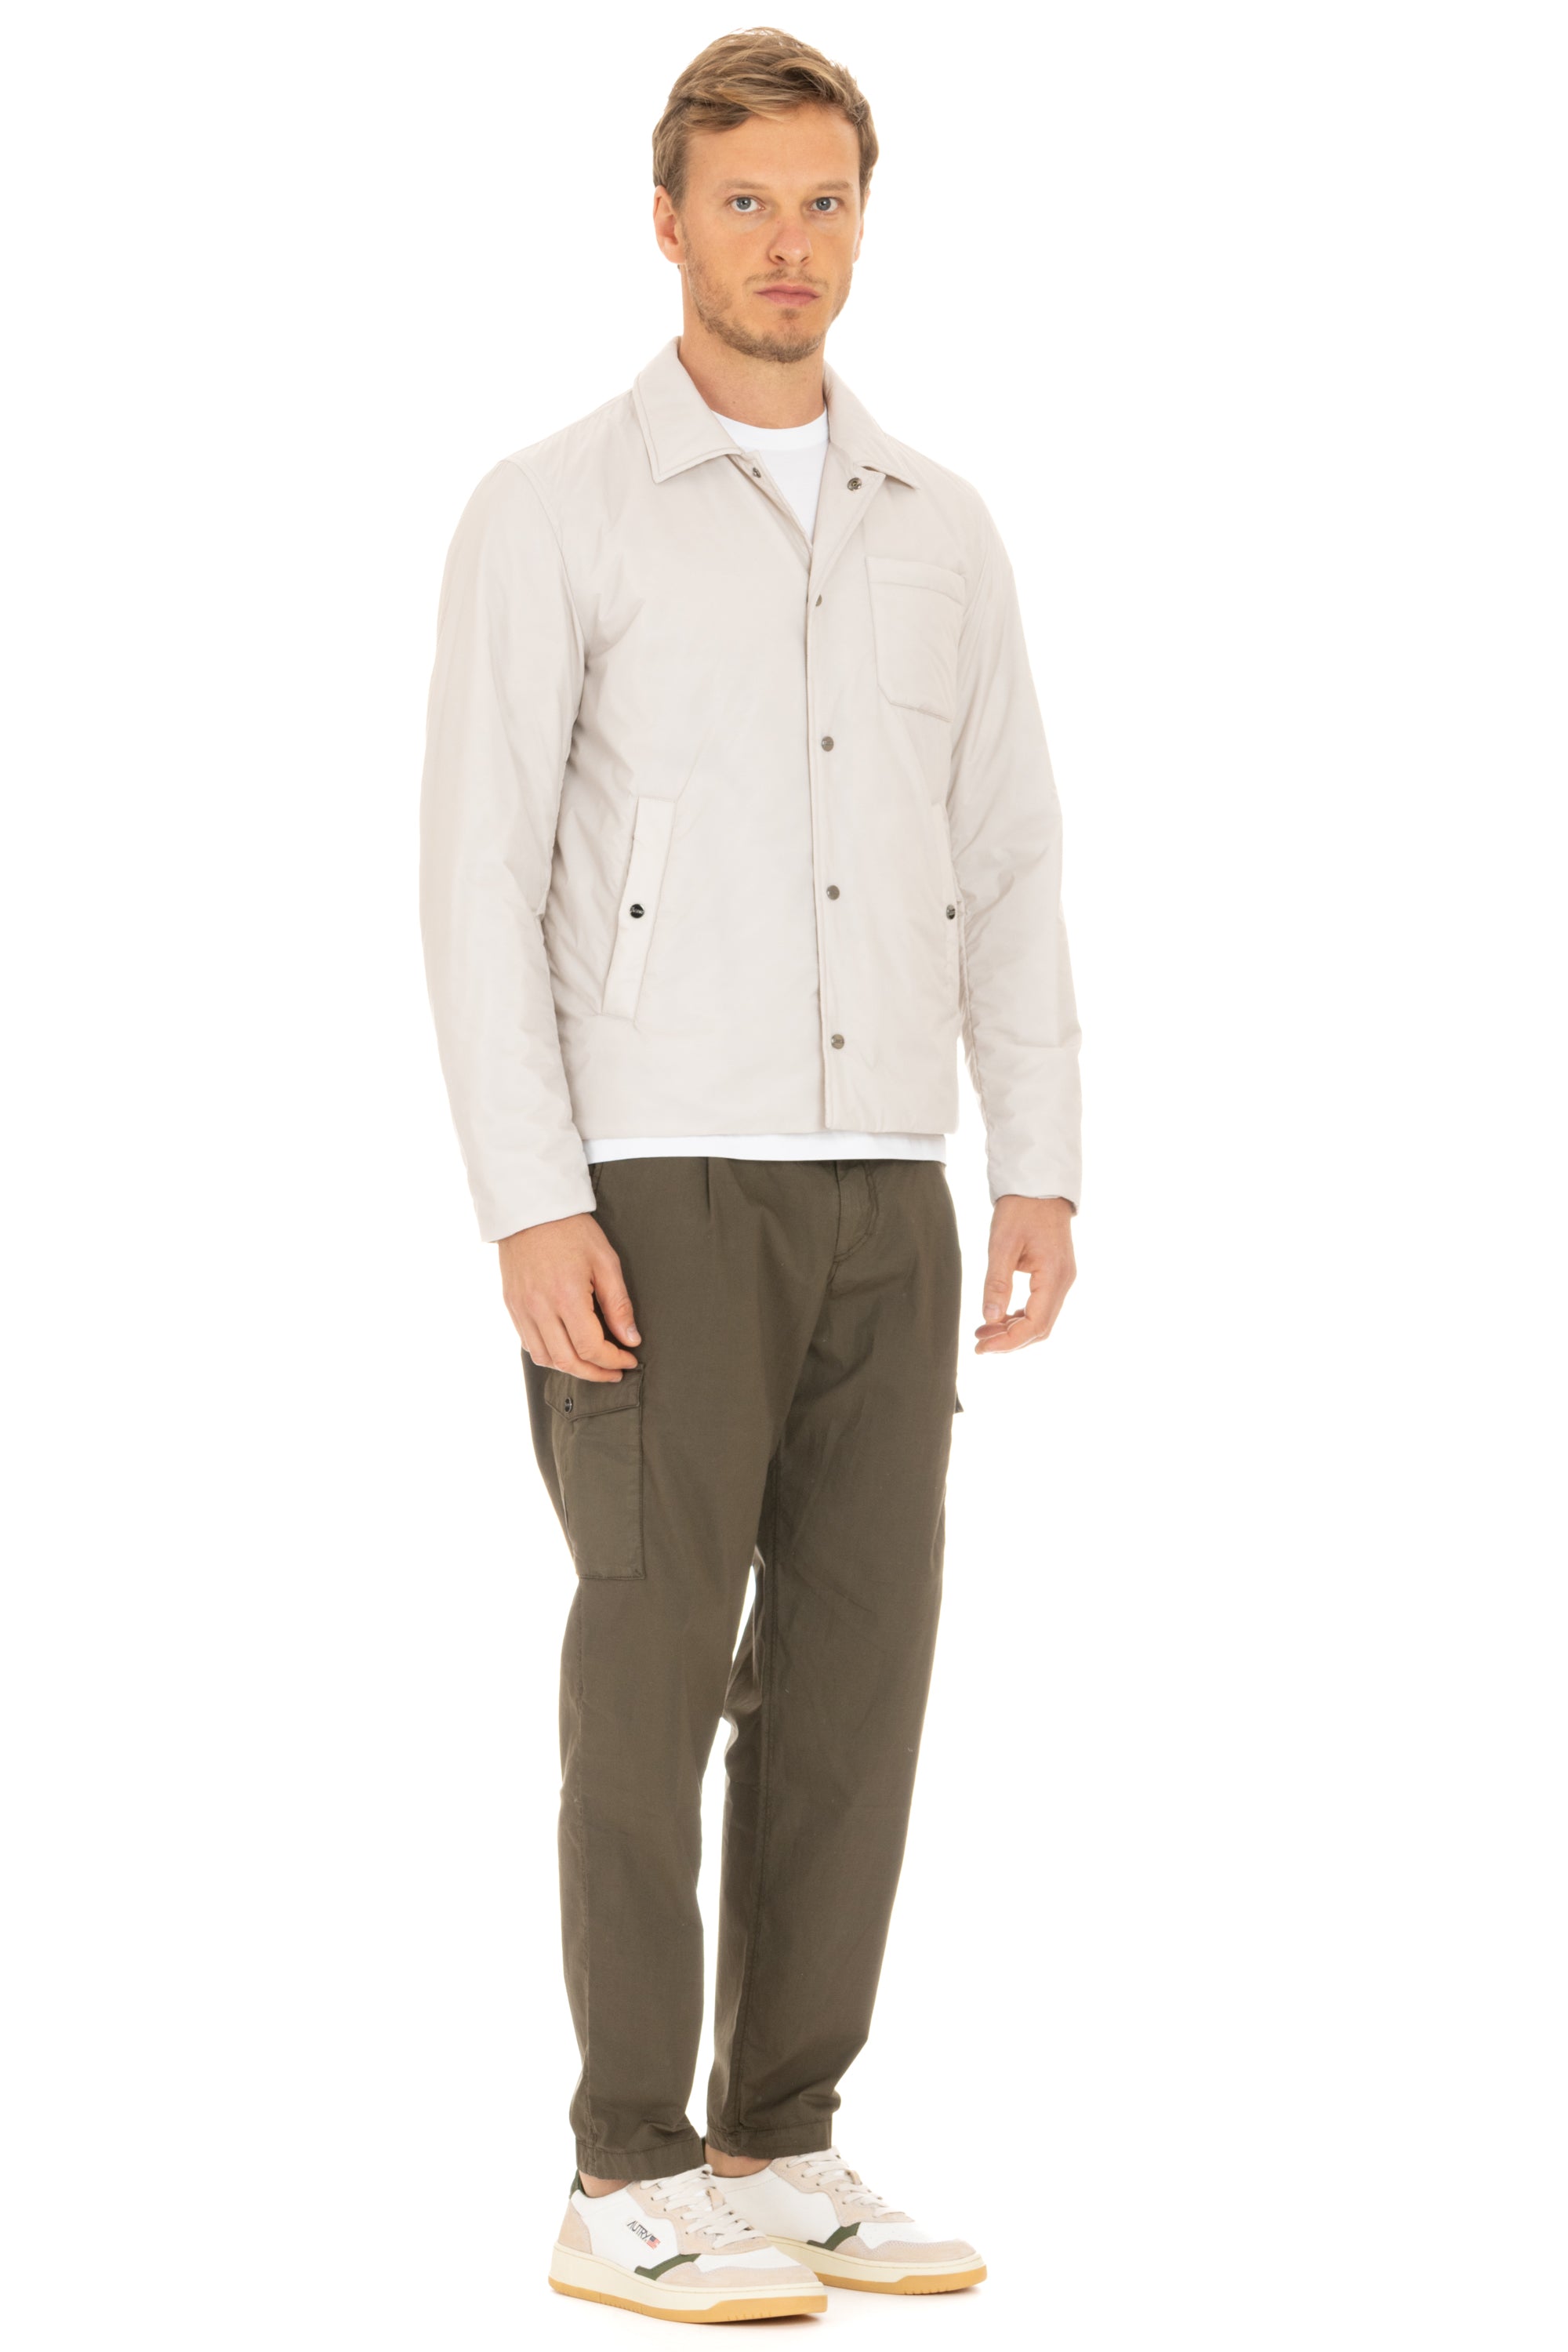 Overshirt padded with thermal wadding